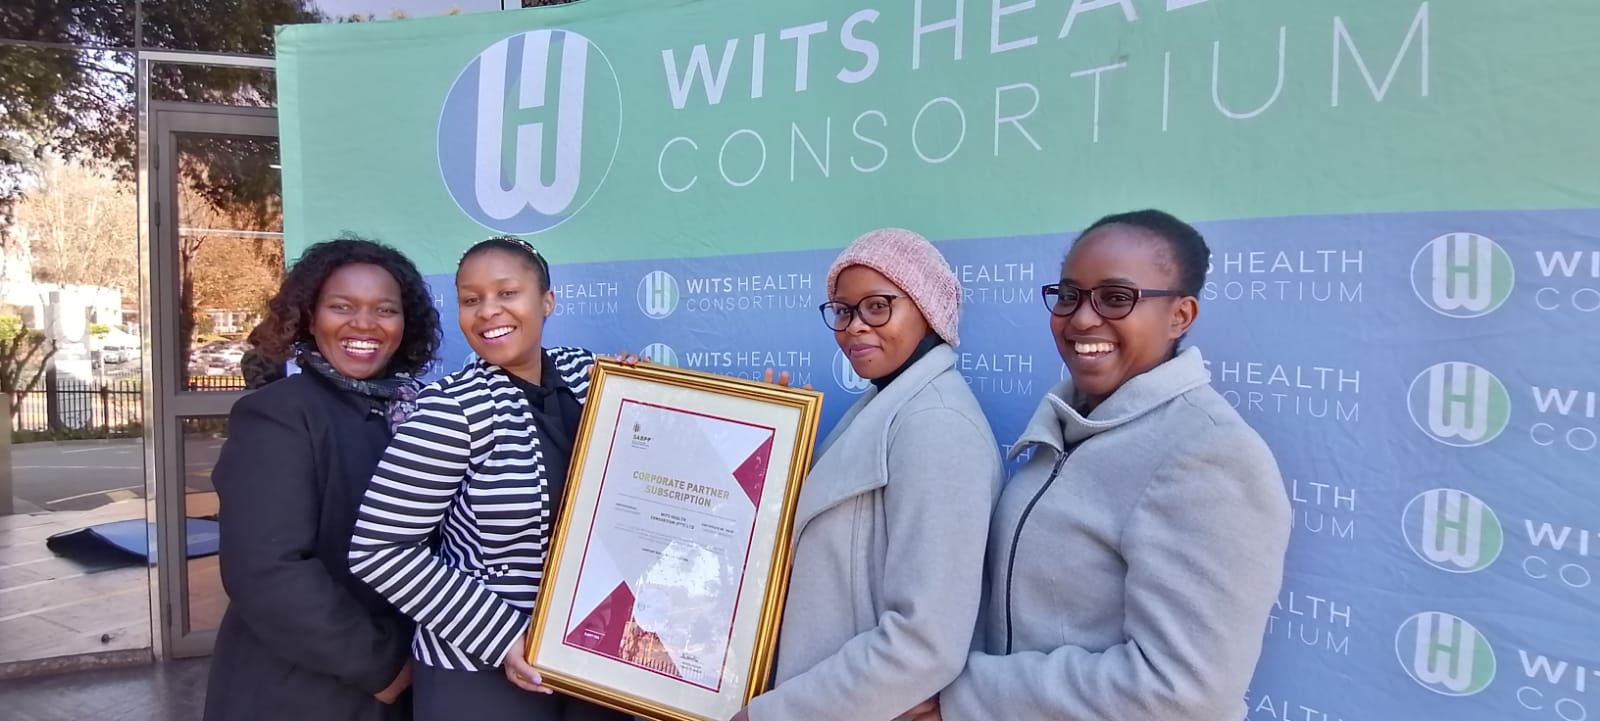 SABPP on Twitter: "Congratulations to Wits Health Consortium for registering as a SABPP Corporate Partner Member. https://t.co/r9x1zpqQxW" / Twitter